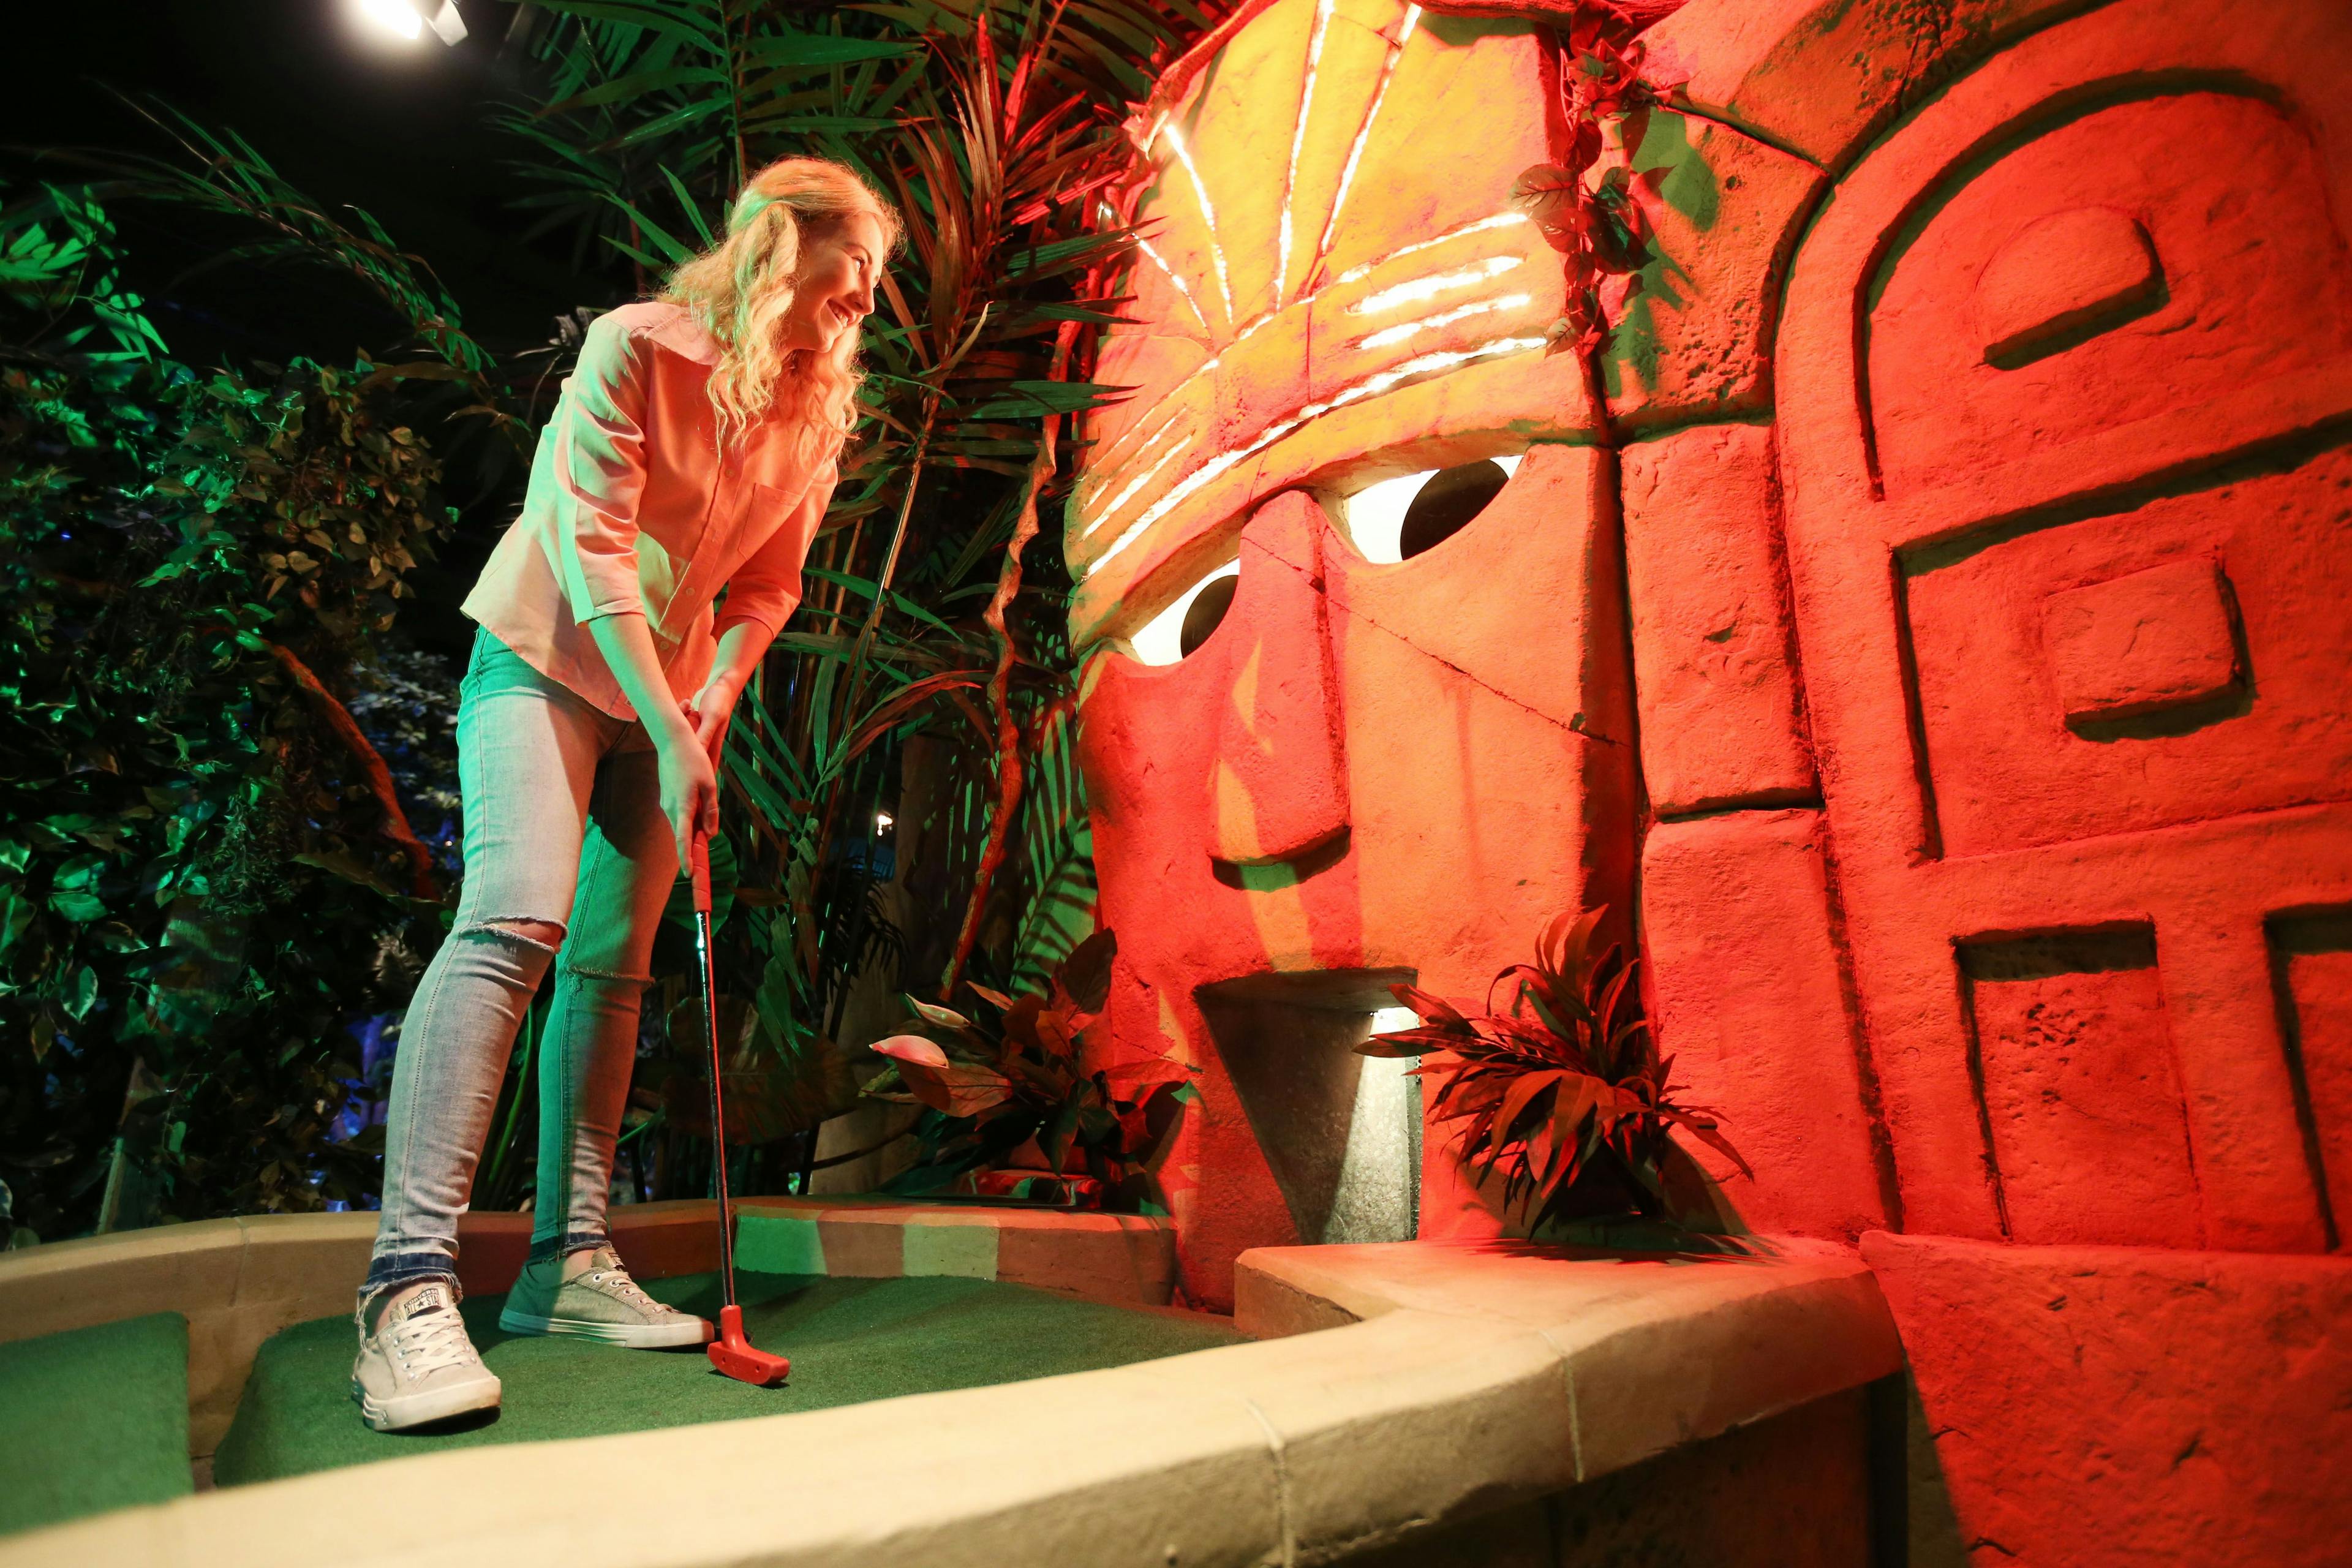 A young girl with blonde hair hitting her ball into the Fabulous Sacred Masks mouth, while his big black eyes stare back and golden crown glows. 